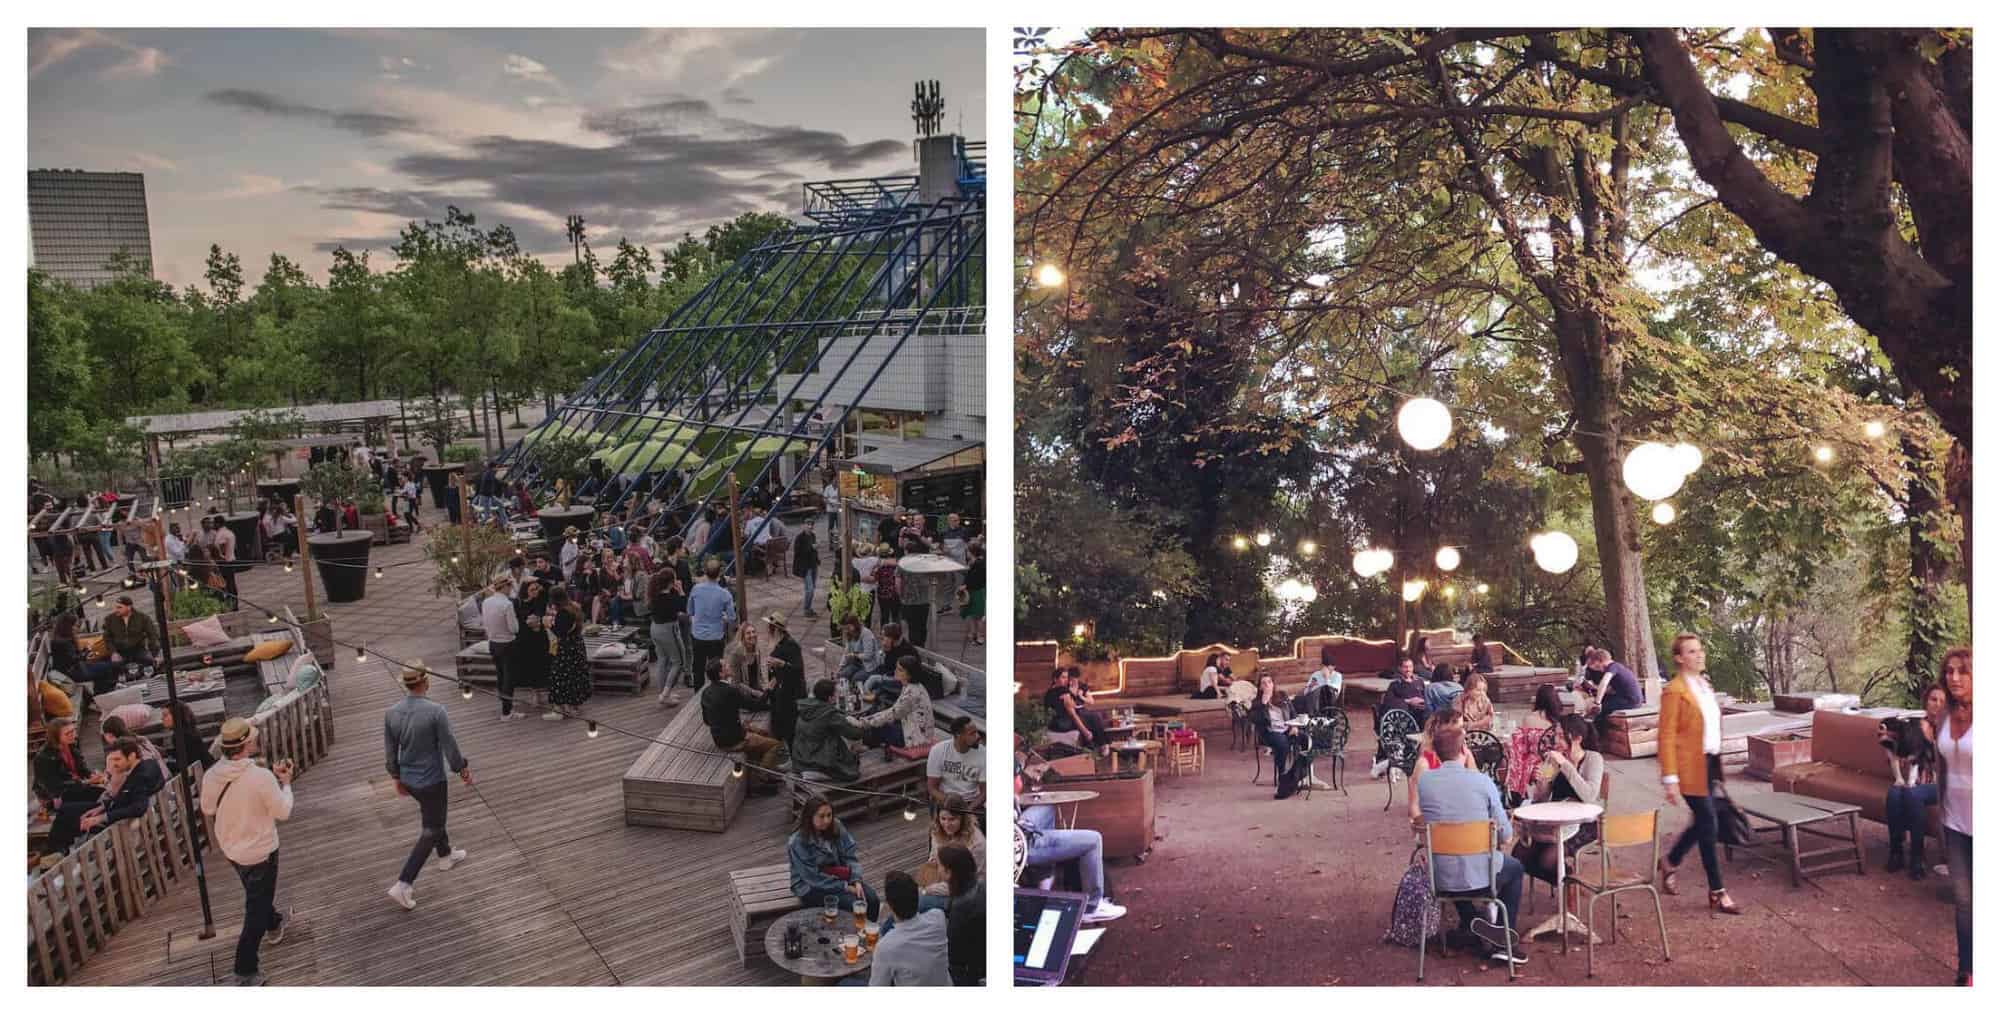 The large terrace full of people enjoying the summer evening on the wooden decking at Le Papa Cabane. The string lights give a magical affect to the evening as people enjoy drinks surrounded by trees in Pavillon Puebla.